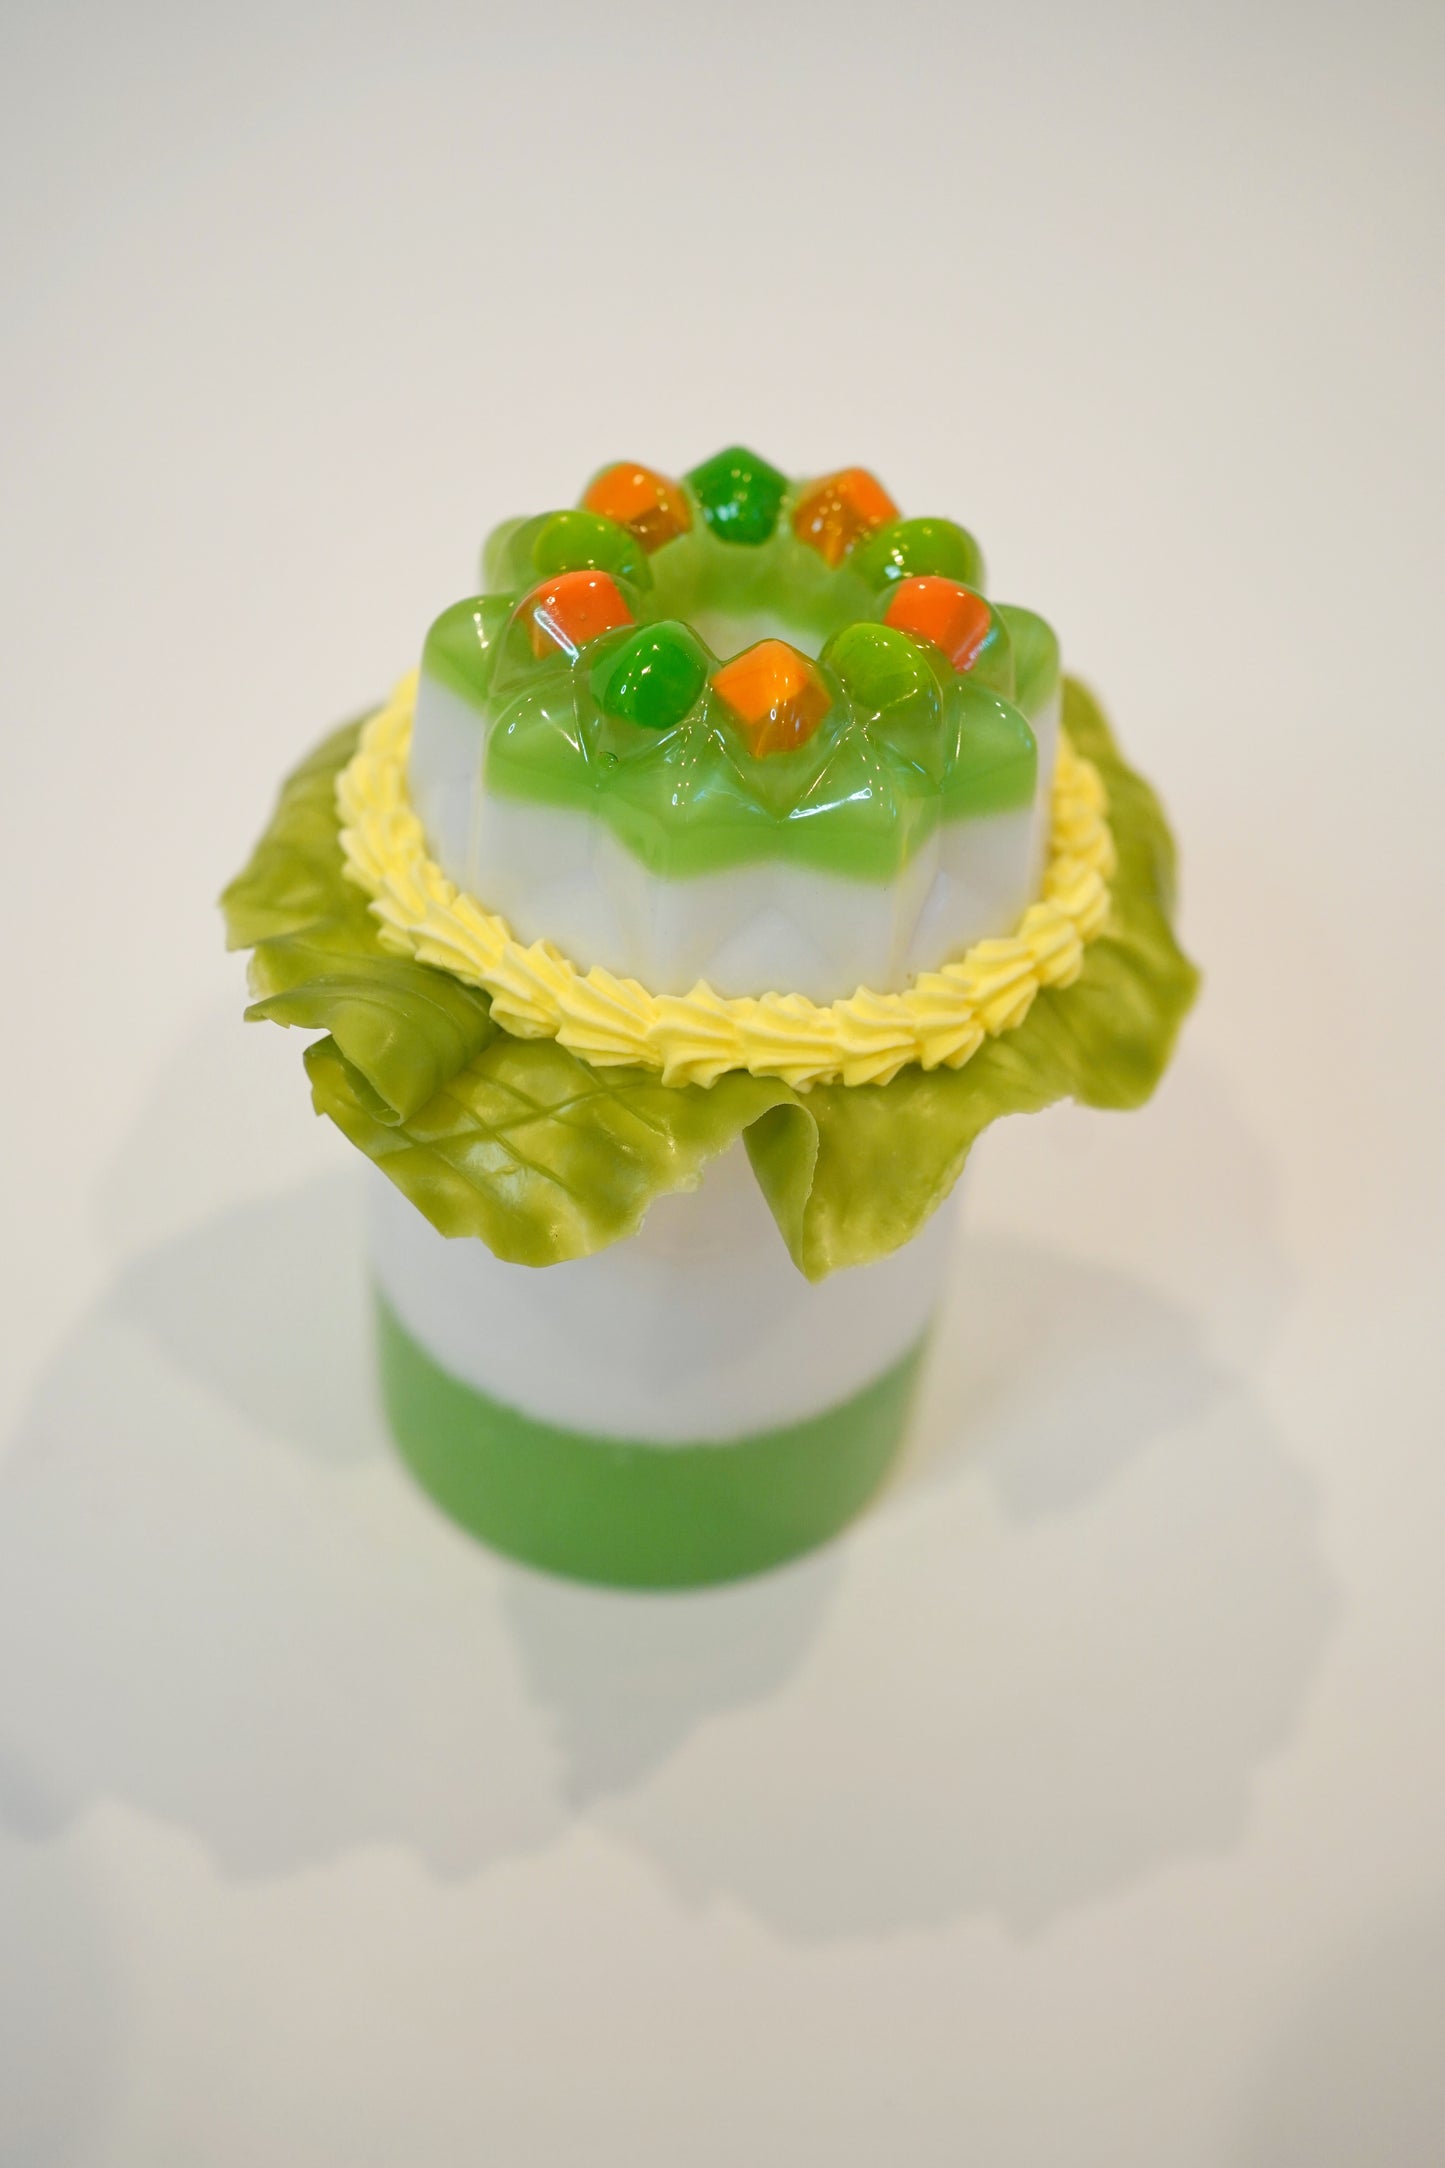 Vintage Savory Jello Jar with Peas and Carrots in Green and White on Plastic Lettuce